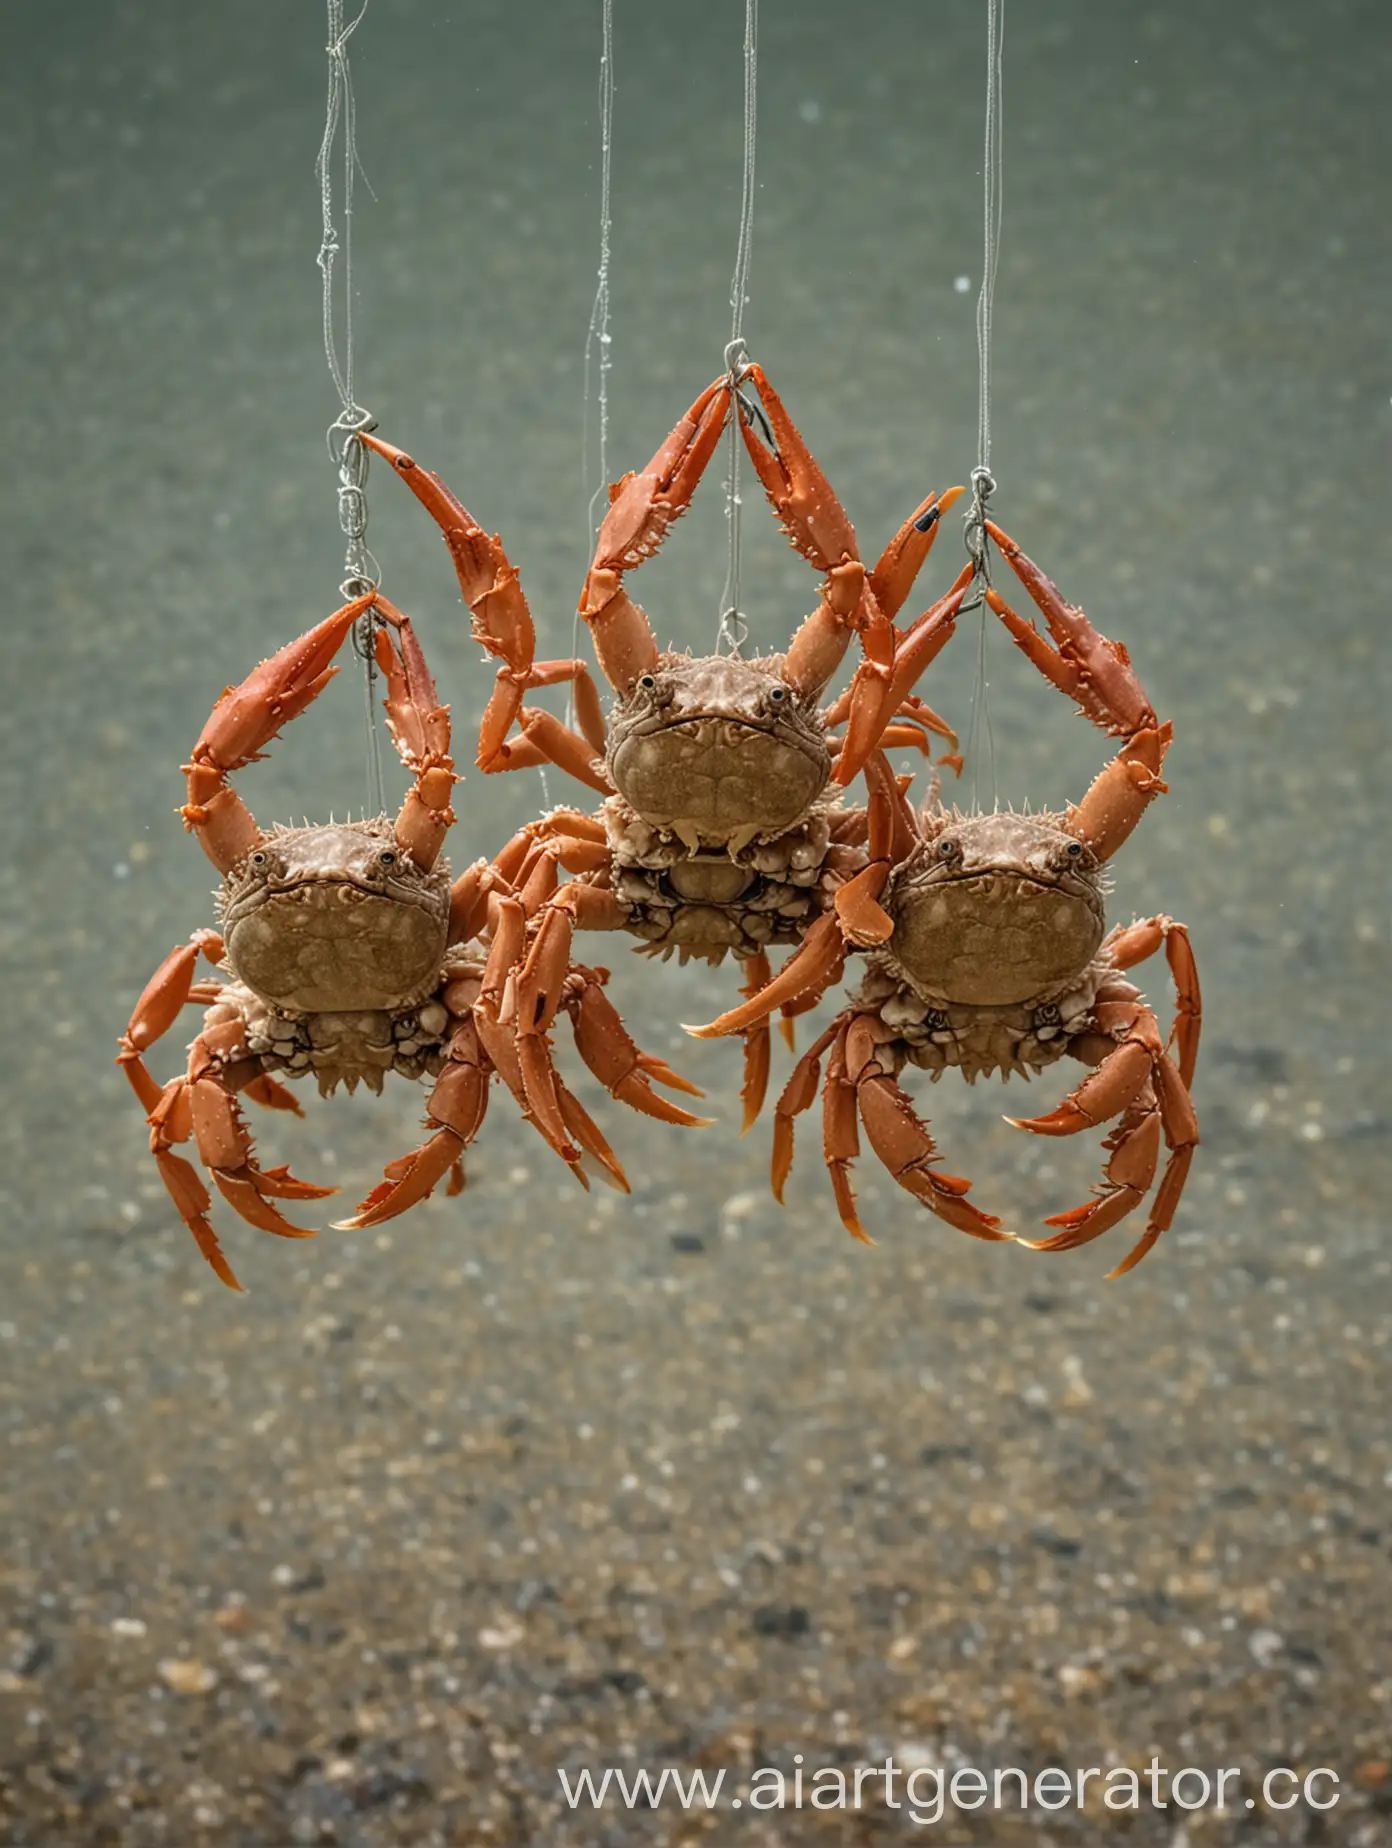 Three-Sea-Crabs-Clinging-Together-with-Pincers